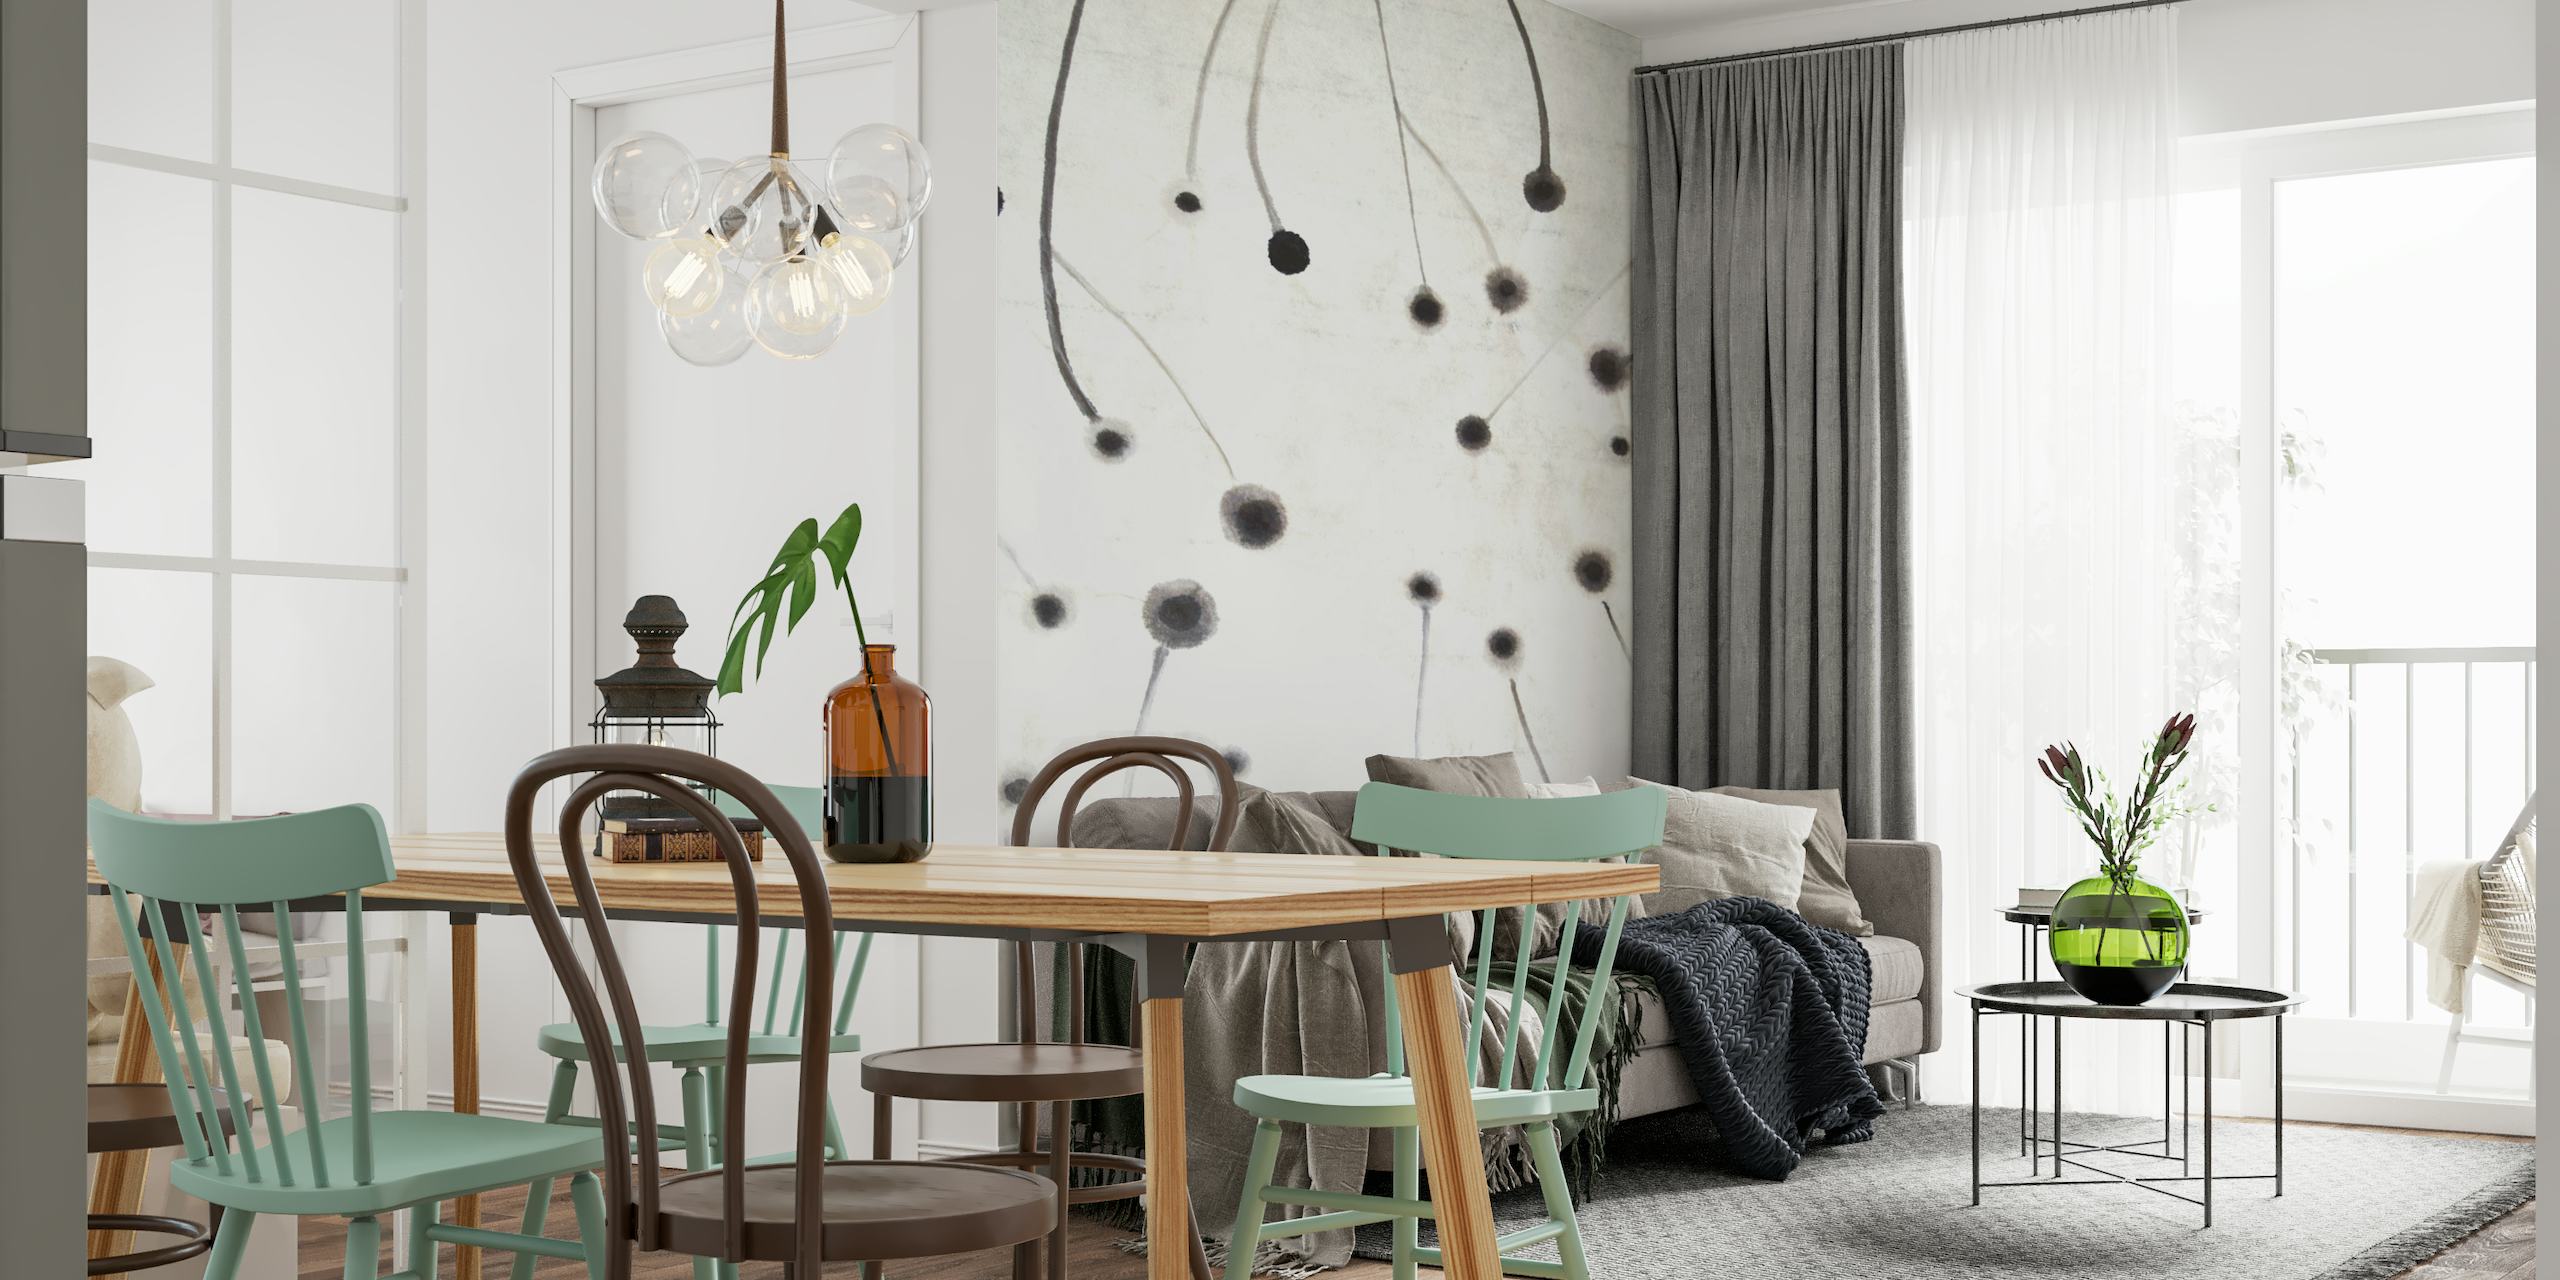 Abstract wall mural depicting sprouting seeds in a minimalistic style with earthy tones.